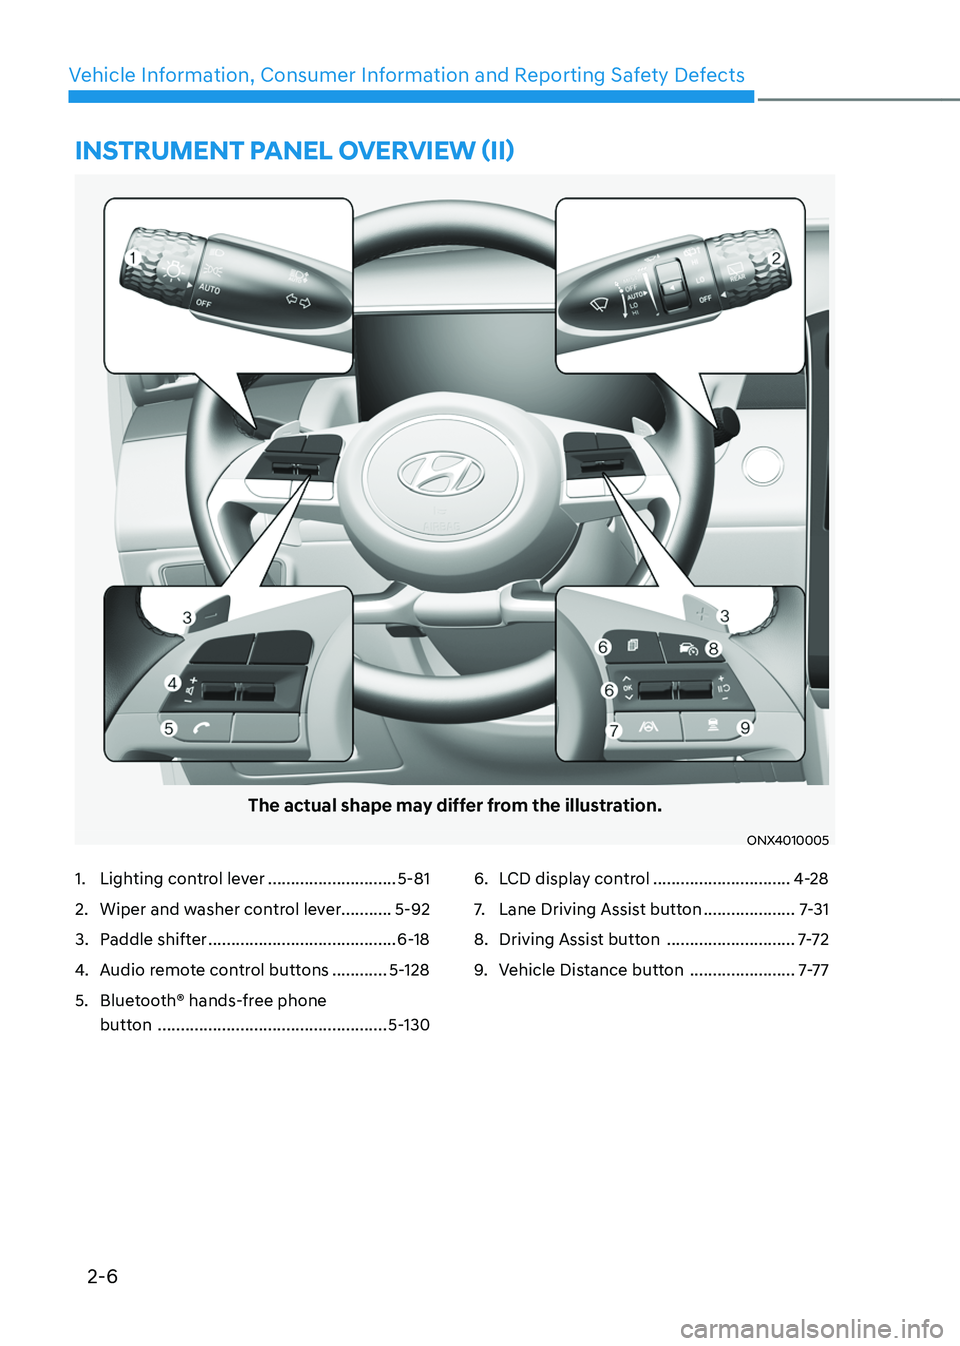 HYUNDAI TUCSON HYBRID 2022  Owners Manual 2-6
Vehicle Information, Consumer Information and Reporting Safety Defects
1. Lighting control lever ............................5-81
2. Wiper and washer control lever...........5-92
3. Paddle shifter